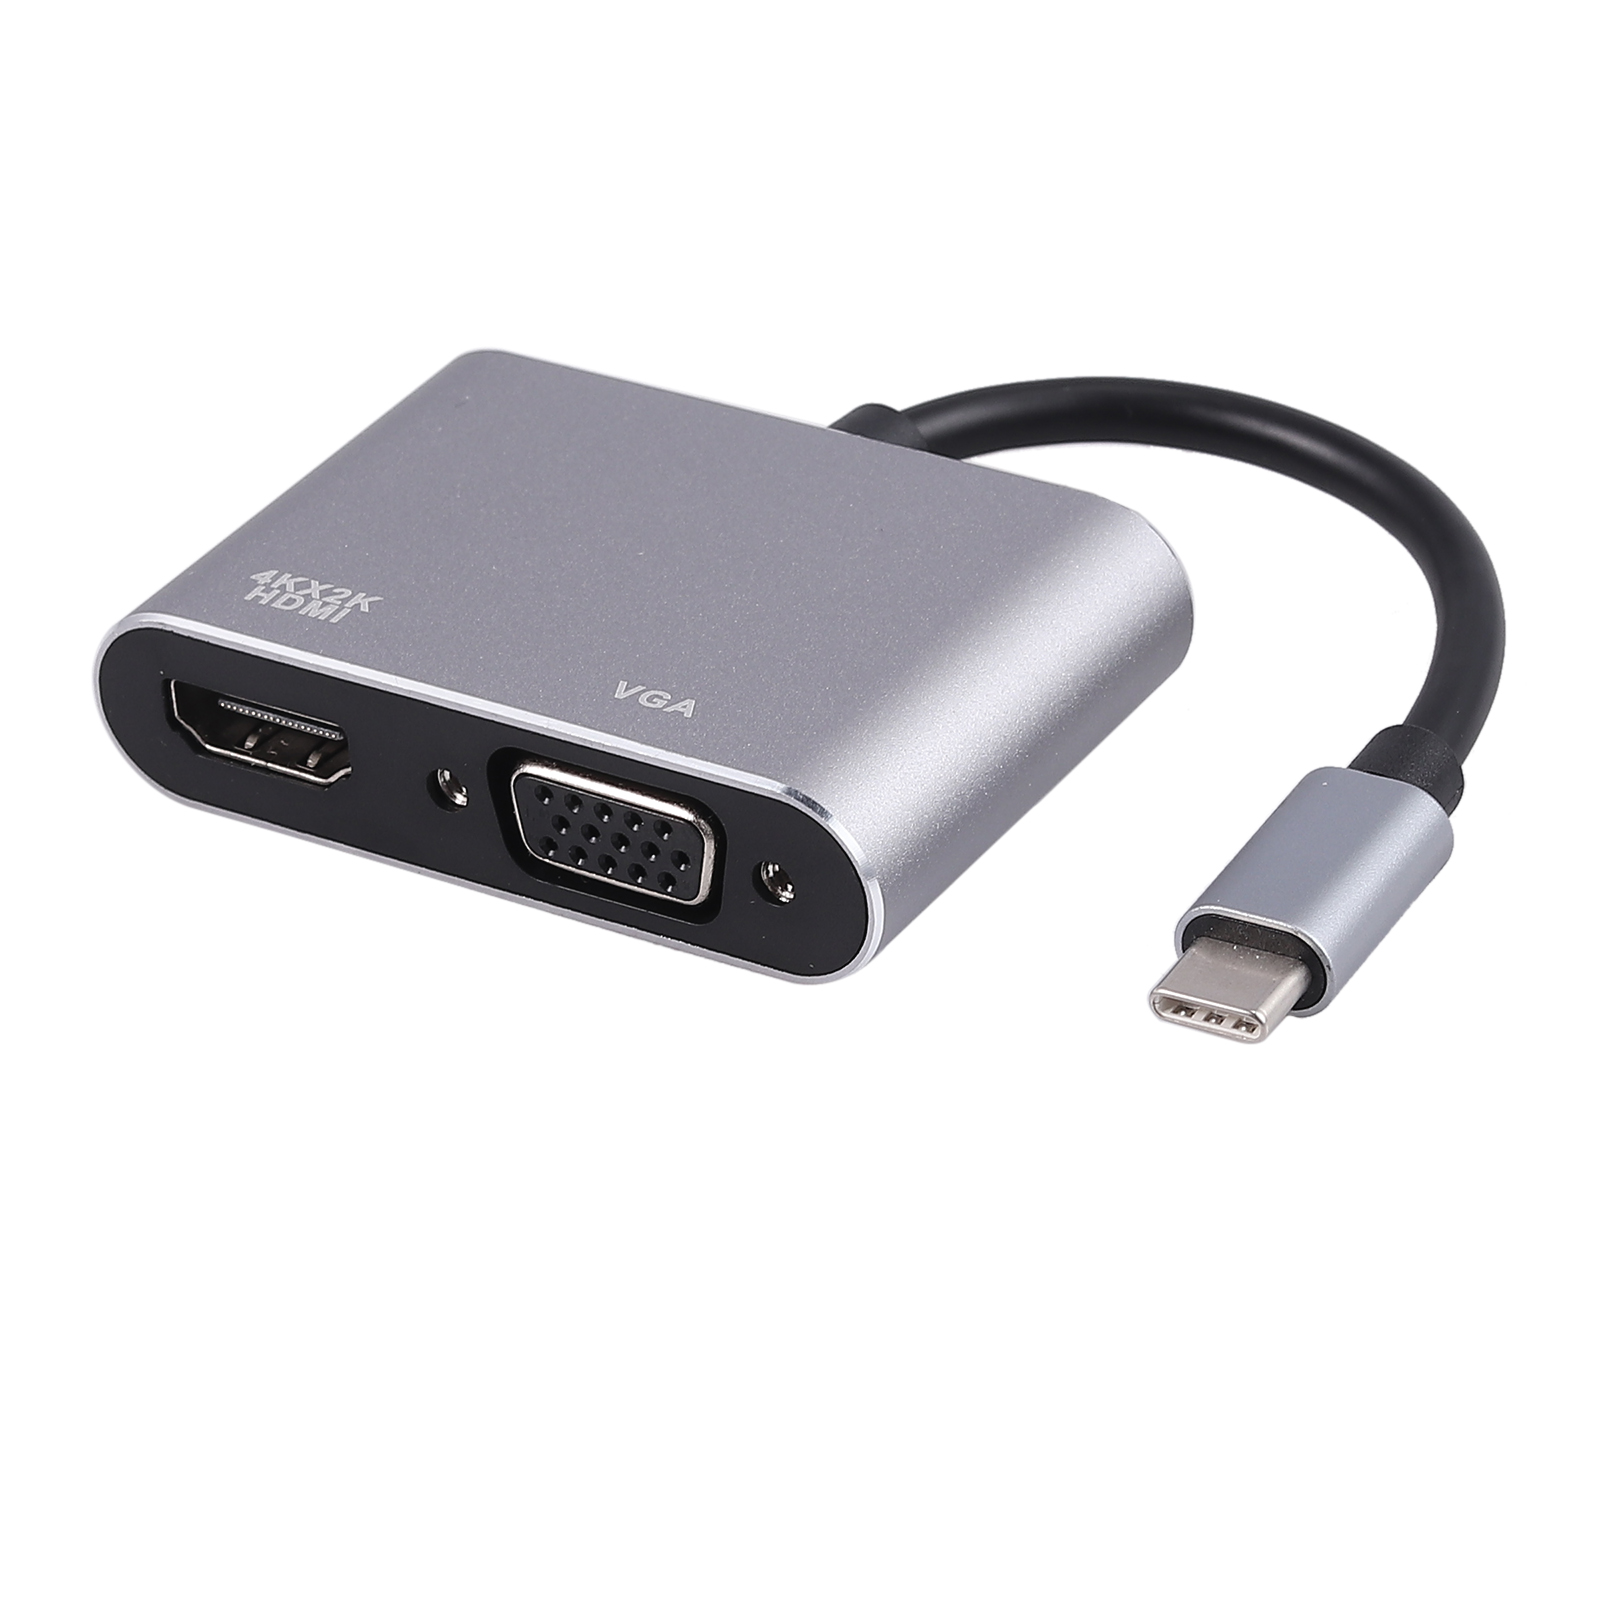 connect vga to macbook pro